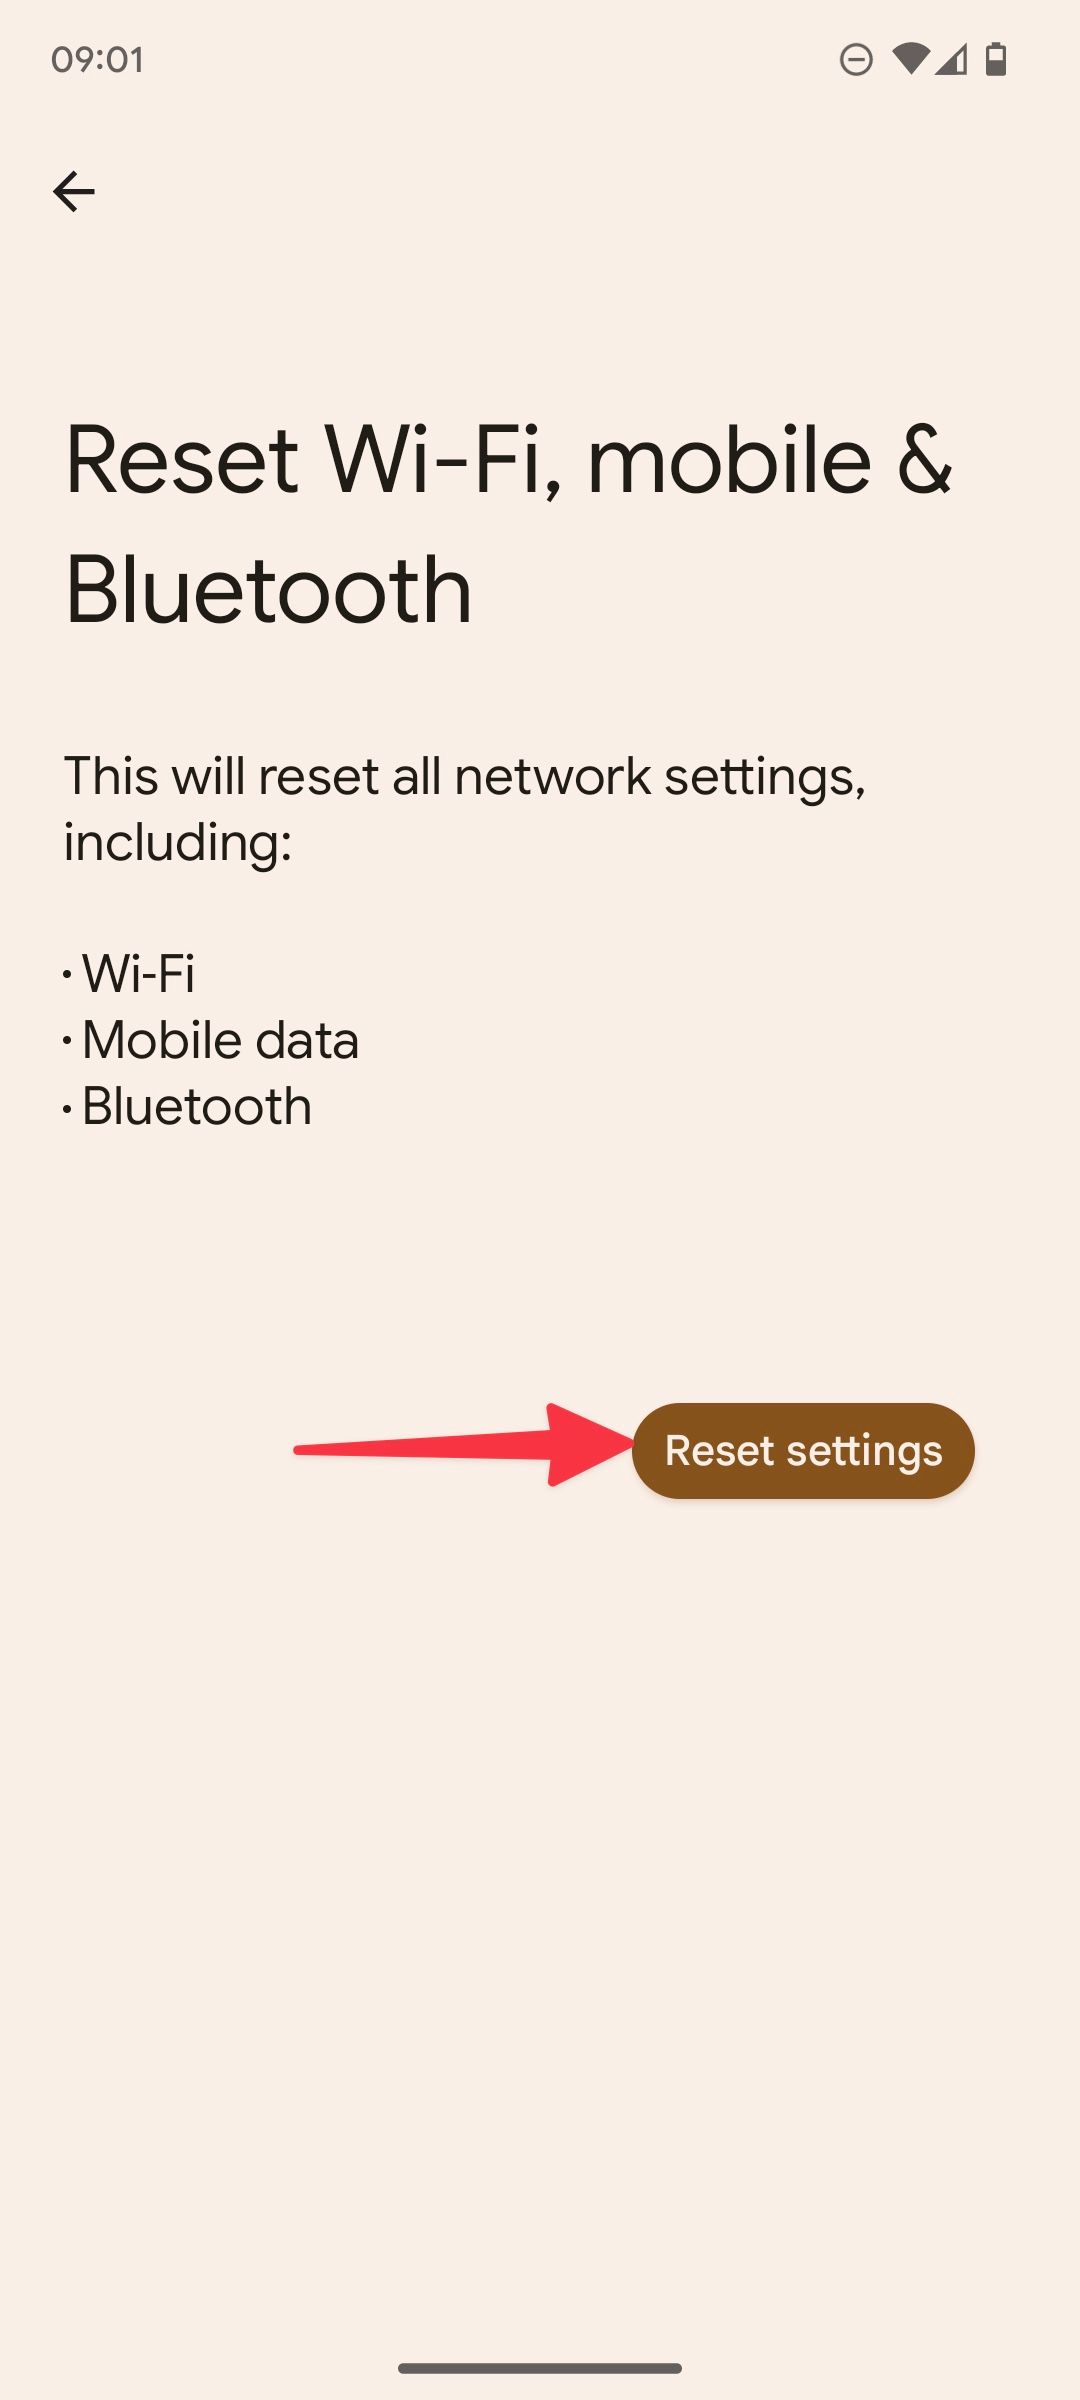 reset network settings on Android